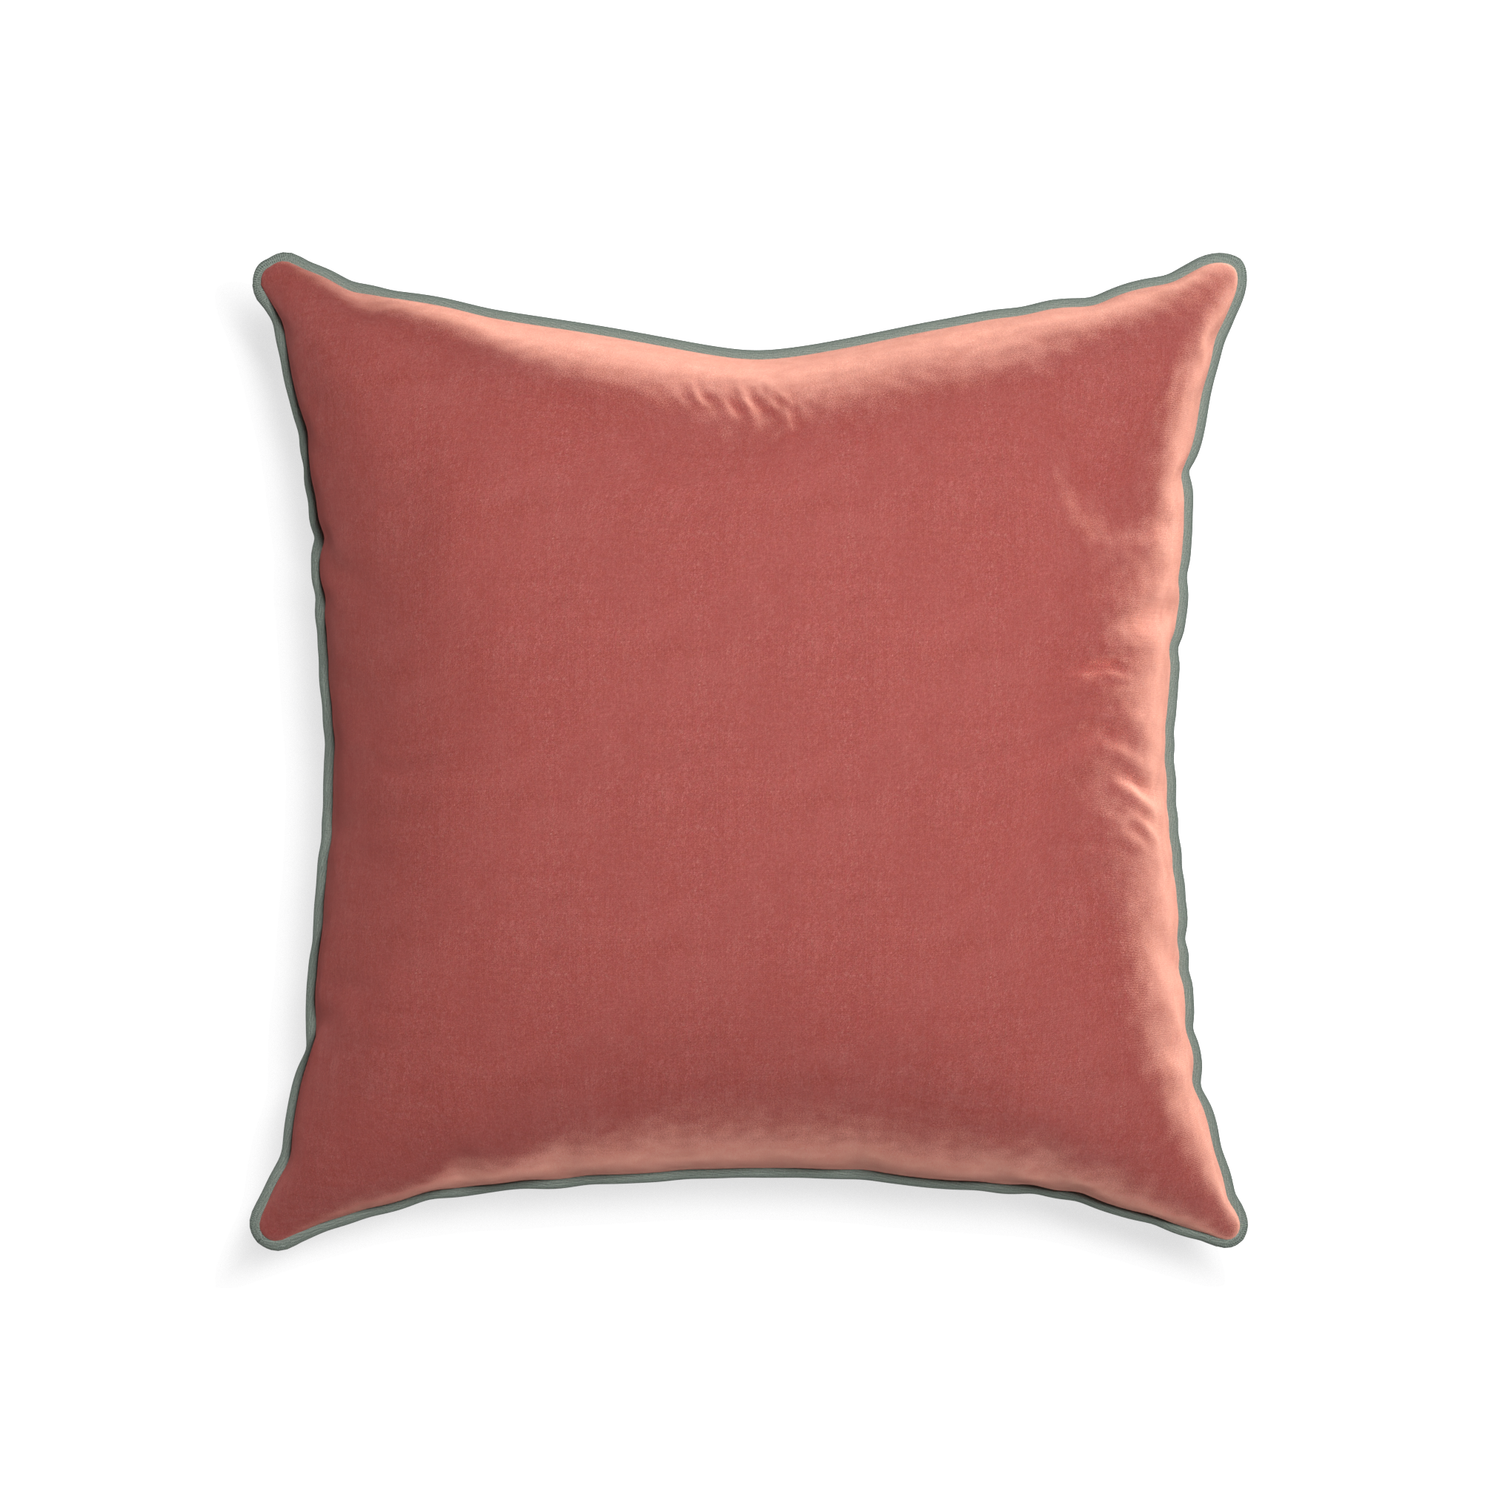 22-square cosmo velvet custom coralpillow with sage piping on white background